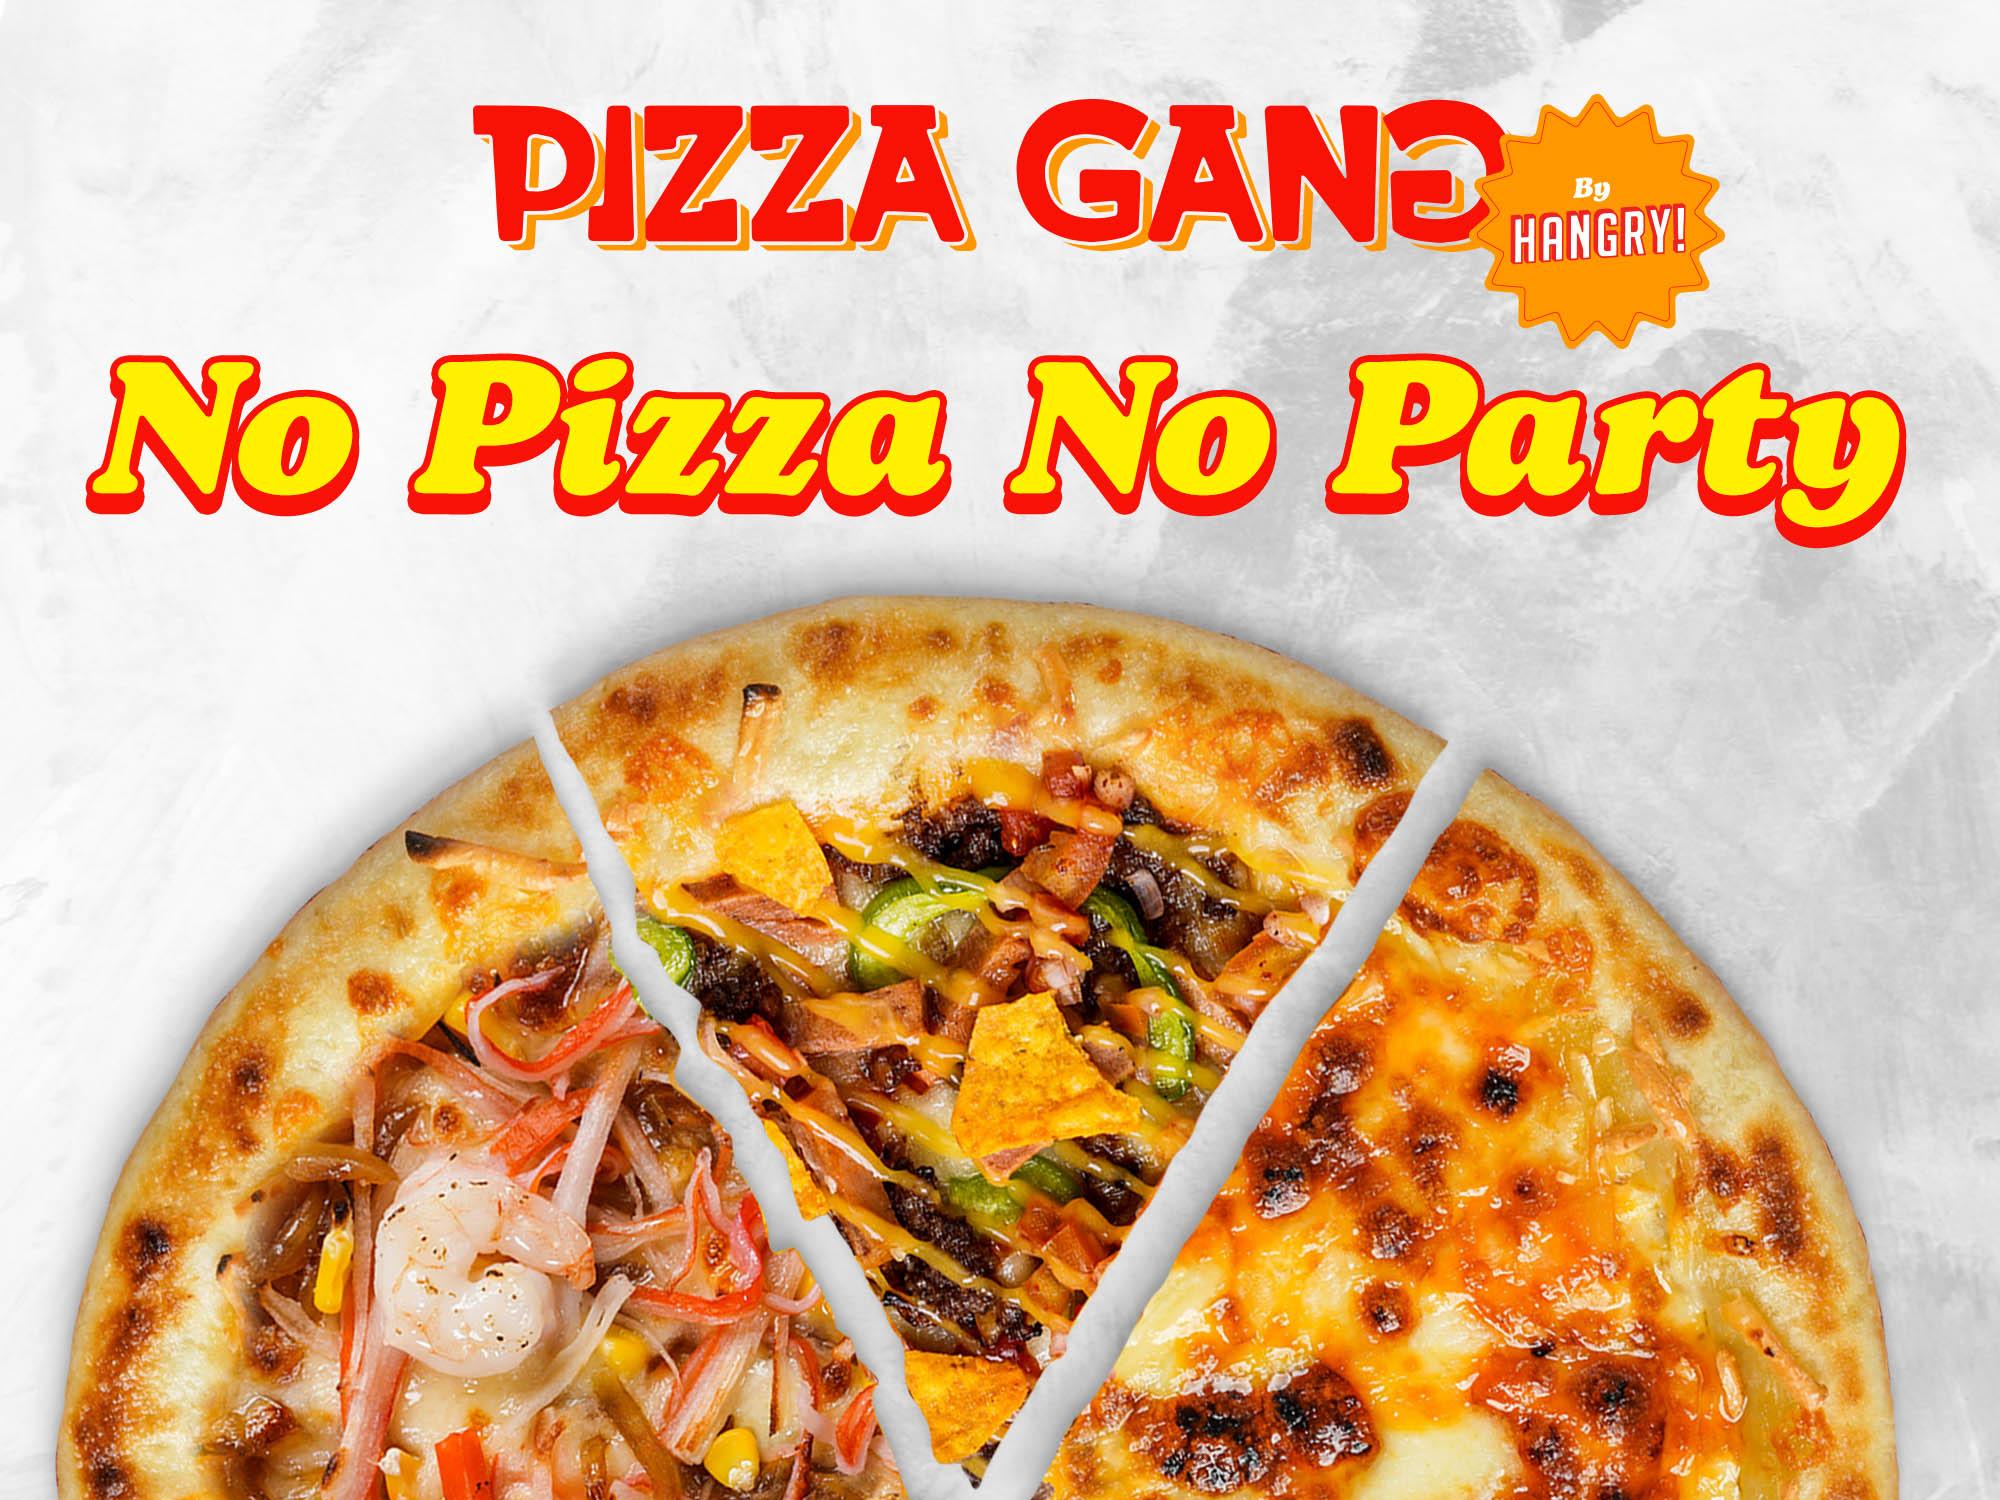 Pizza Gang by Hangry, Grogol